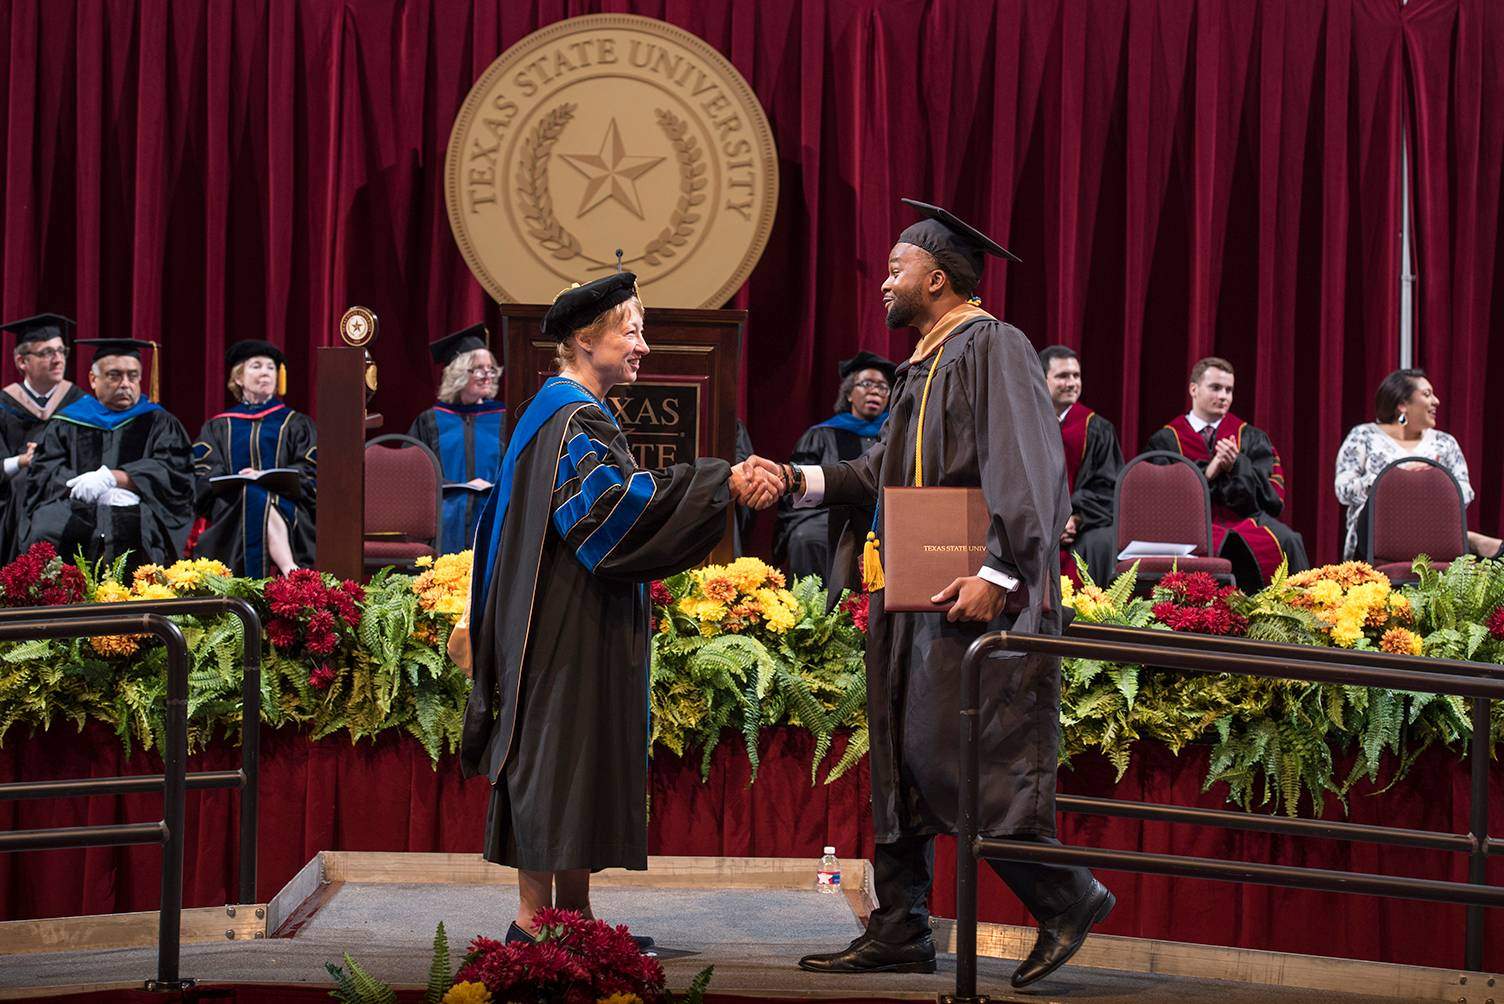 dr trauth shaking the hand of young man on stage during commencement